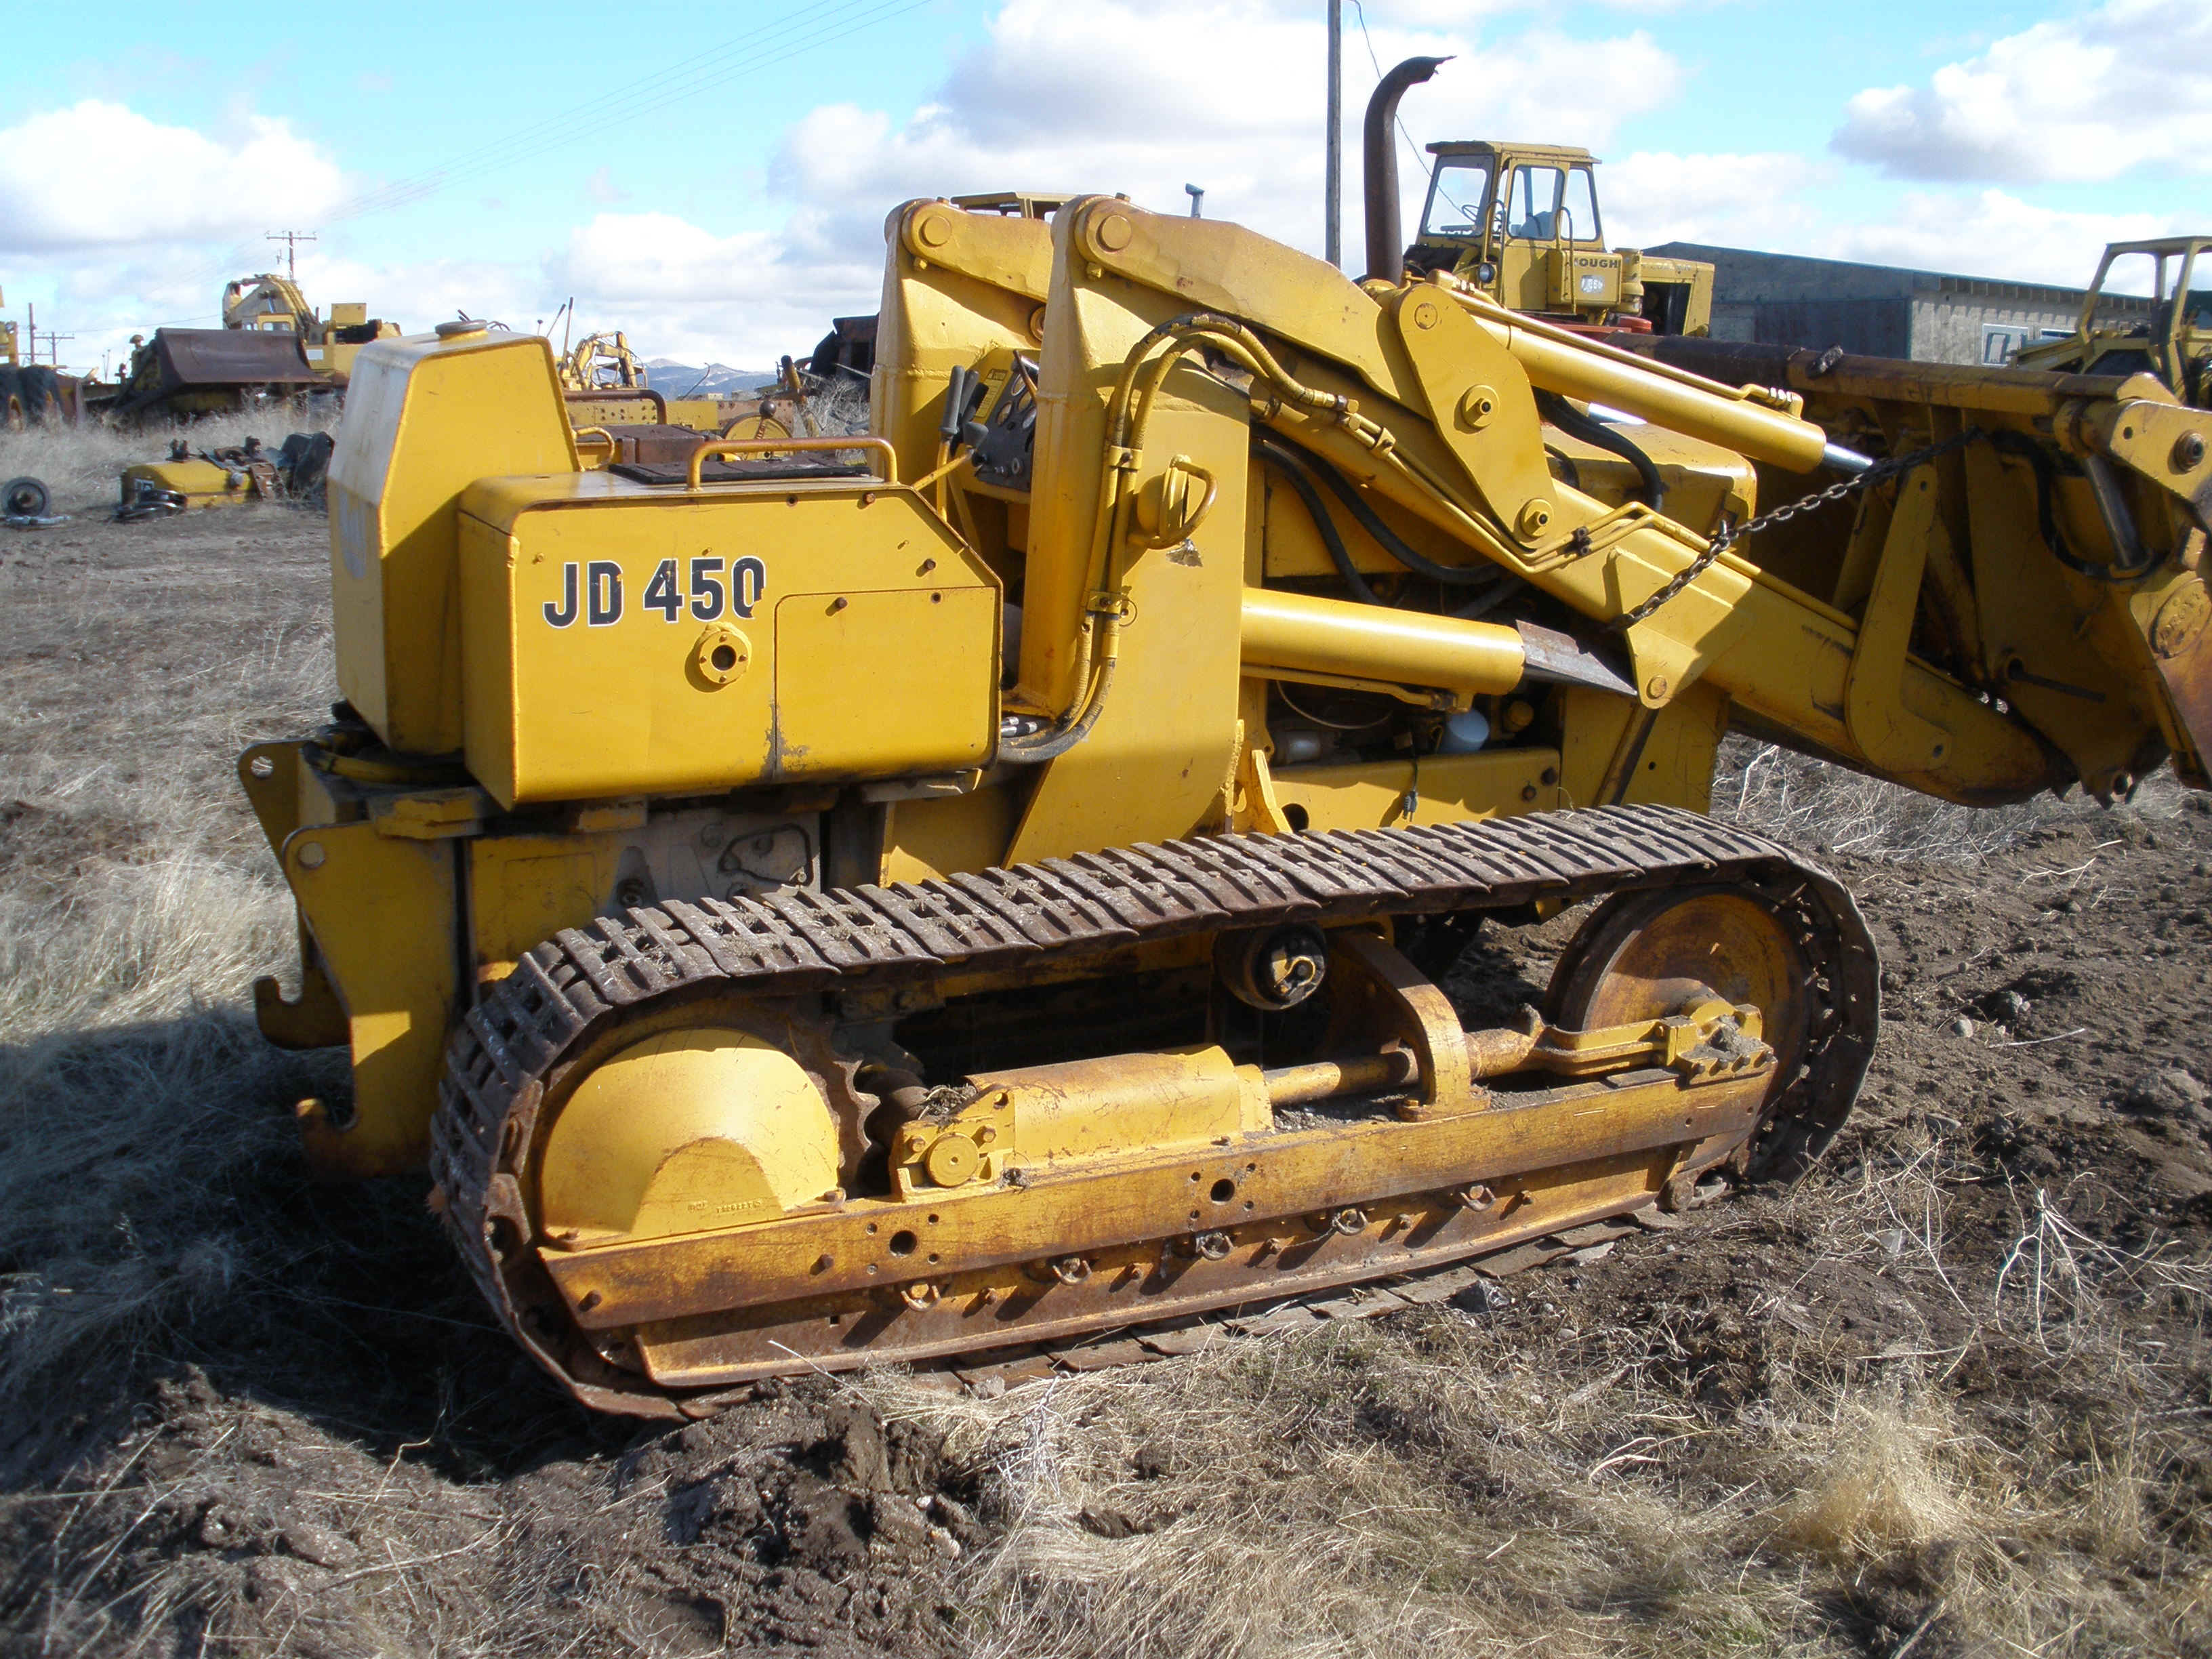 Used John Deere Construction Equipment Parts for sale 450 ...